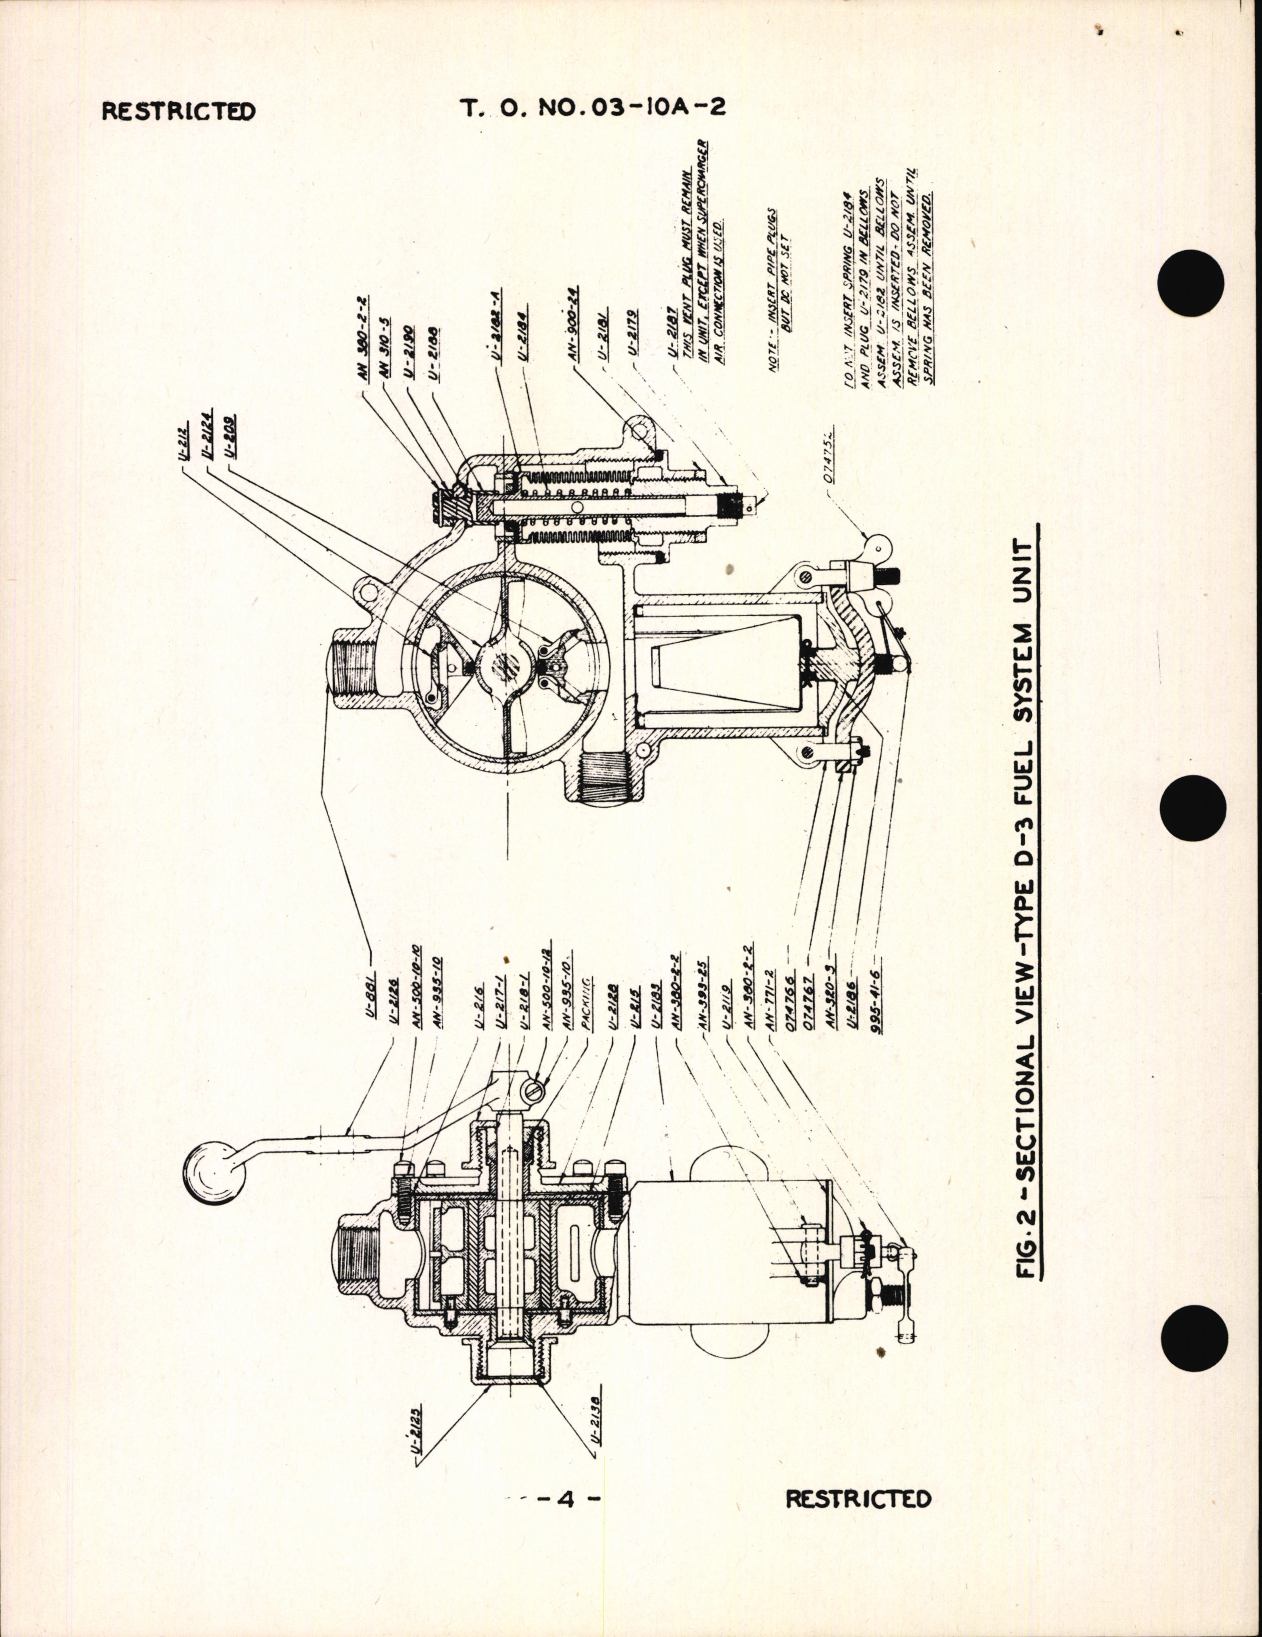 Sample page 6 from AirCorps Library document: Handbook of Instructions with Parts Catalog for Type D-3 Fuel System Unit